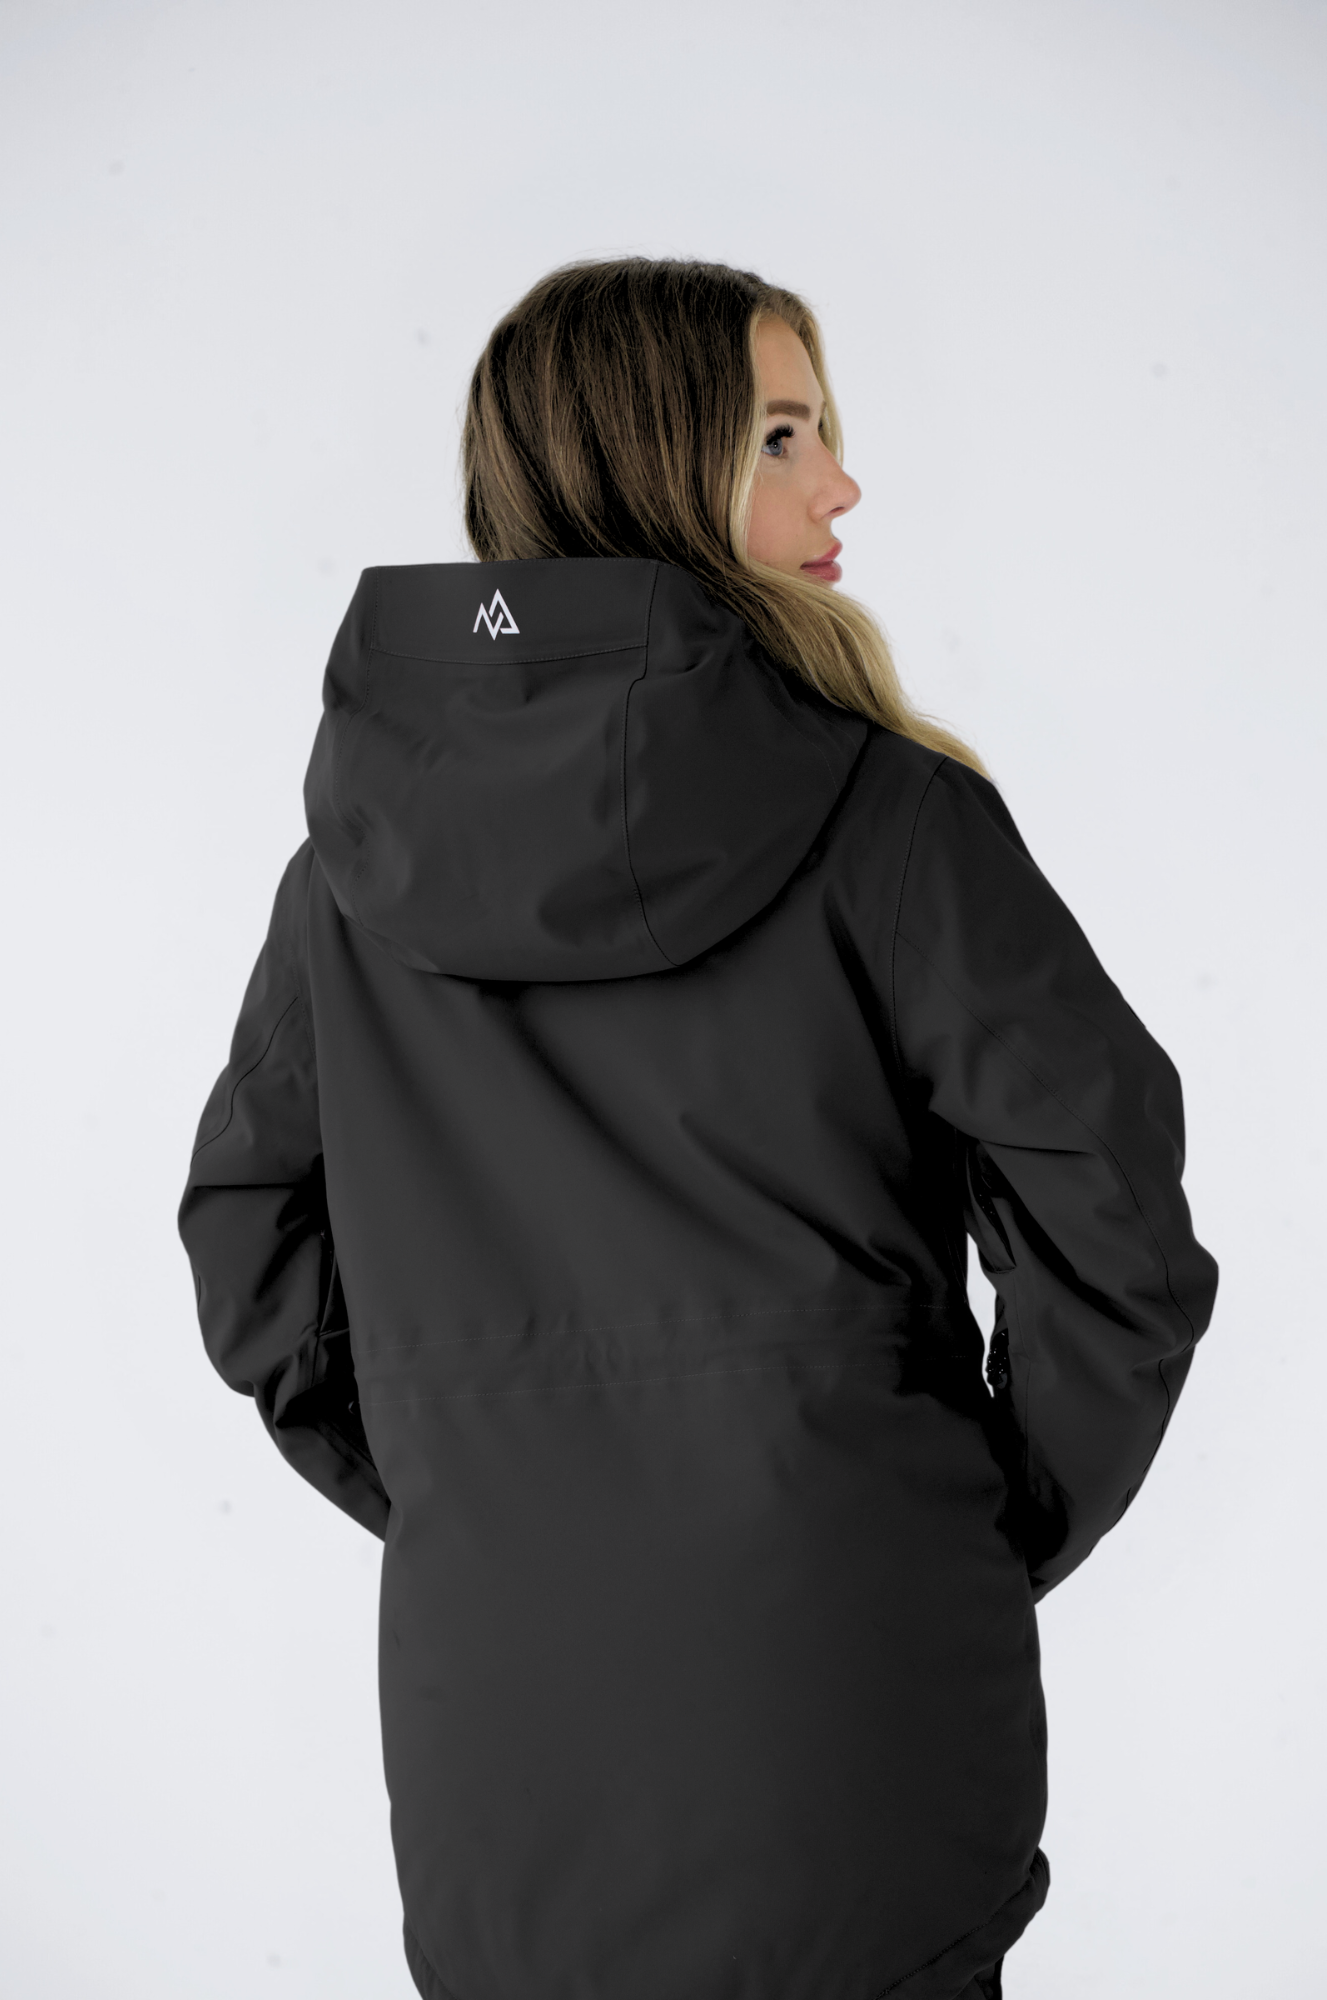 Rear view of a woman wearing a black Nexarina jacket, showing the adjustable hood and the brand logo on the upper back